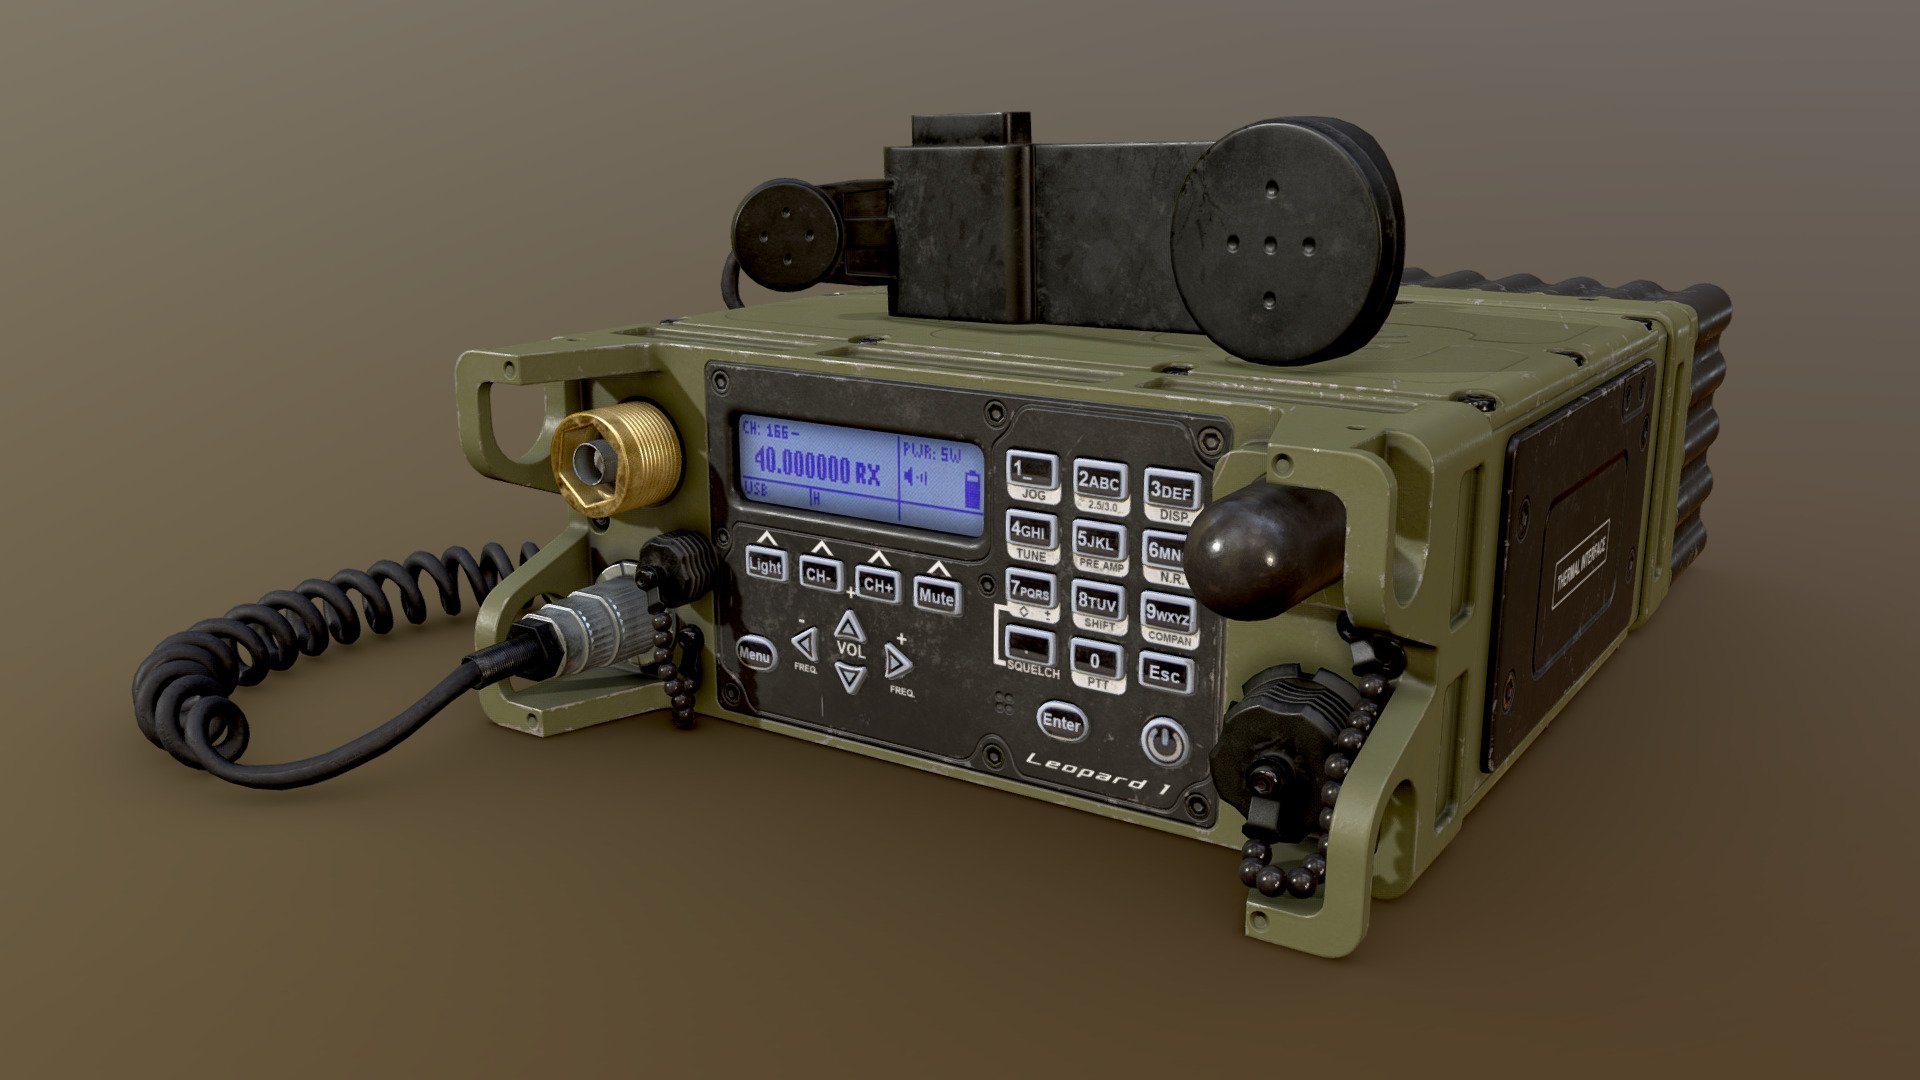 Final assignment for Game Assets Pipeline at Howest DAE.
We had to model an object that could be present in a mercenary's hideout. I decided to go for this military radio.

Modeled in Maya, baked and textured in Substance Painter 3d model